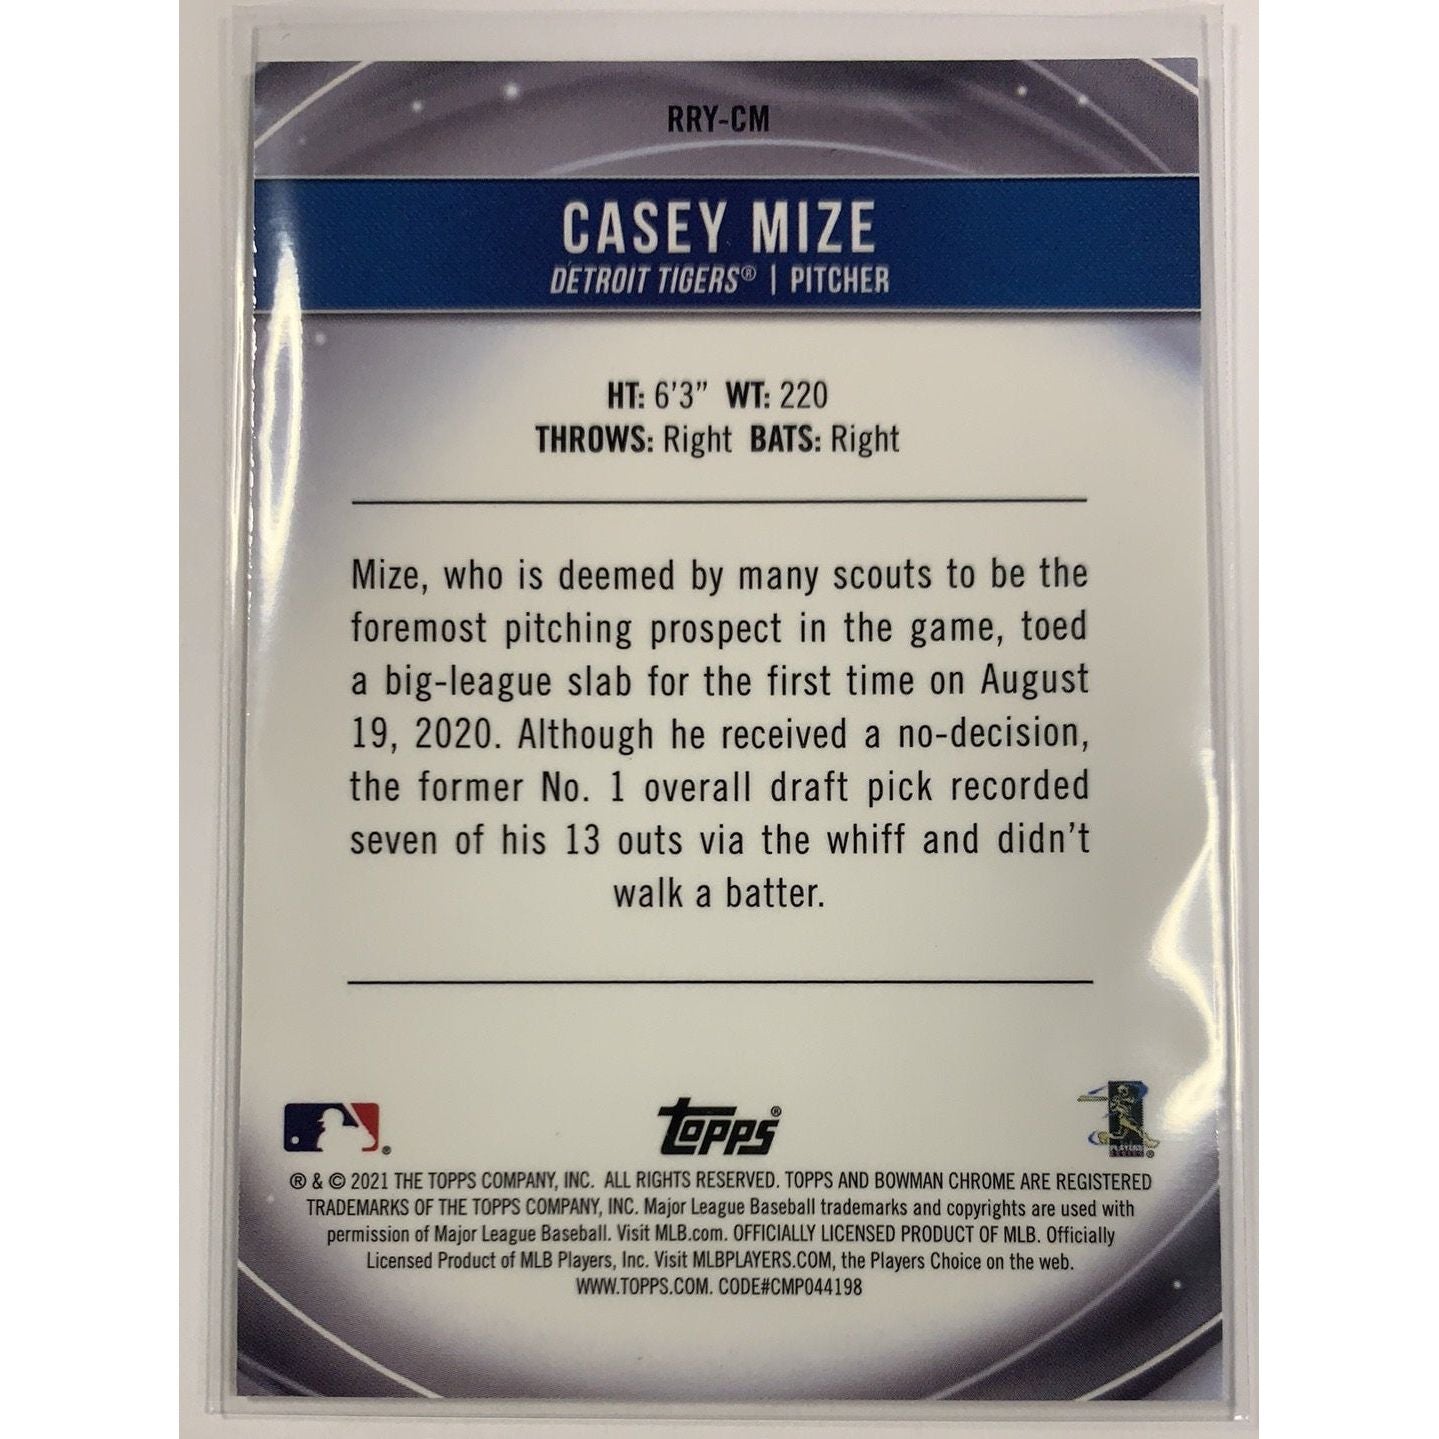  2020 Bowman Chrome Casey Mize Rookie of the Year Favorites  Local Legends Cards & Collectibles